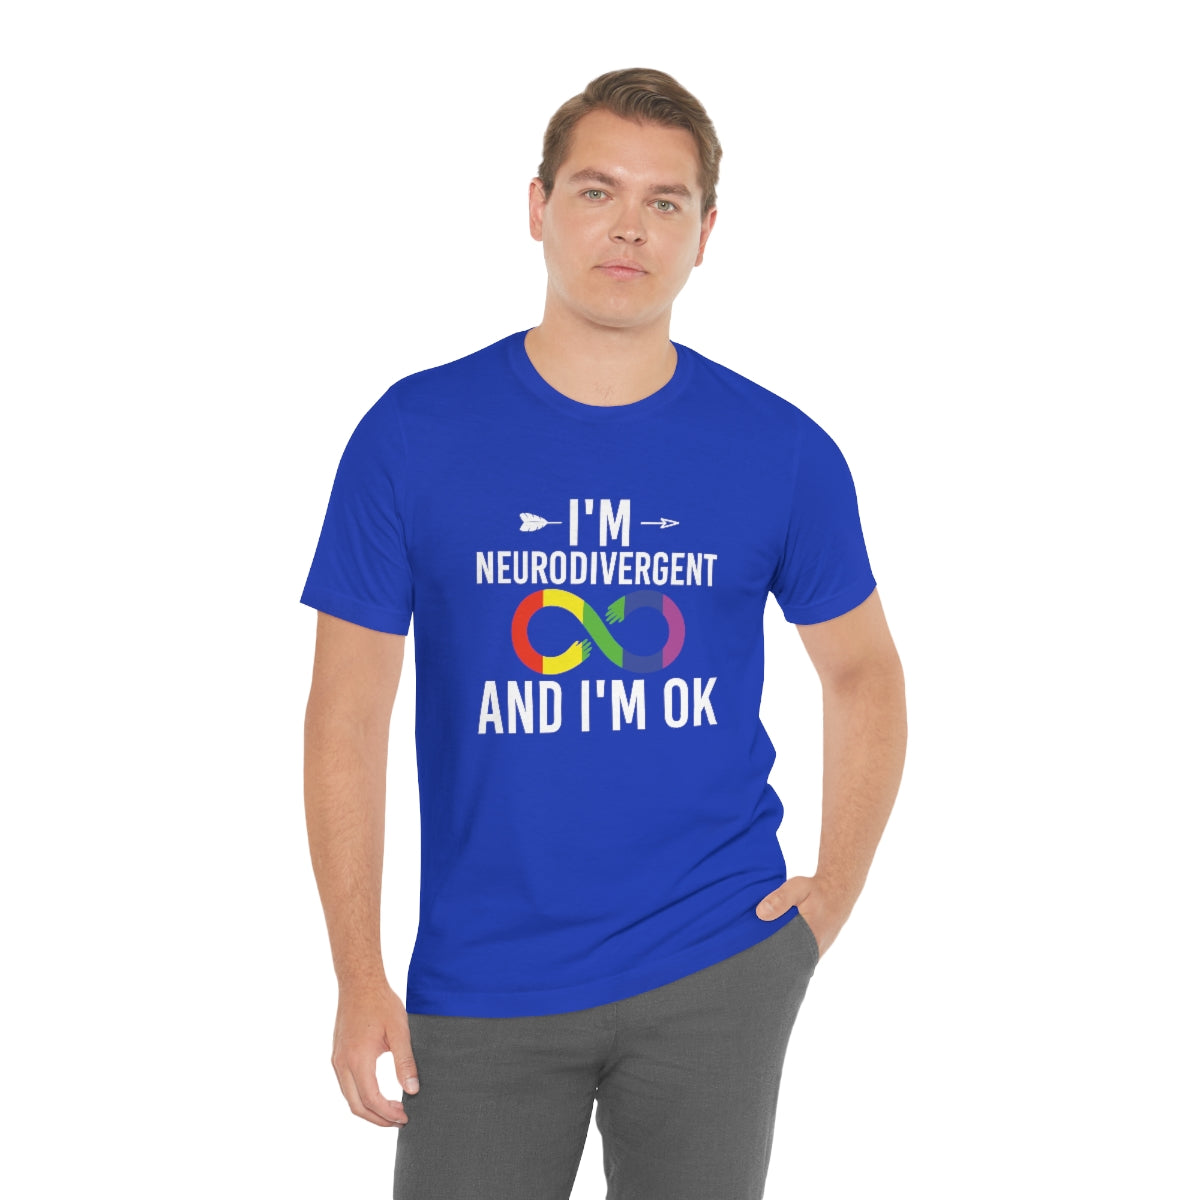 If I Can't Wear Leggings I'm Not Going T-shirt Adult Themed Cute Quote Soft  Cotton Unisex Tee Shirts -  Canada